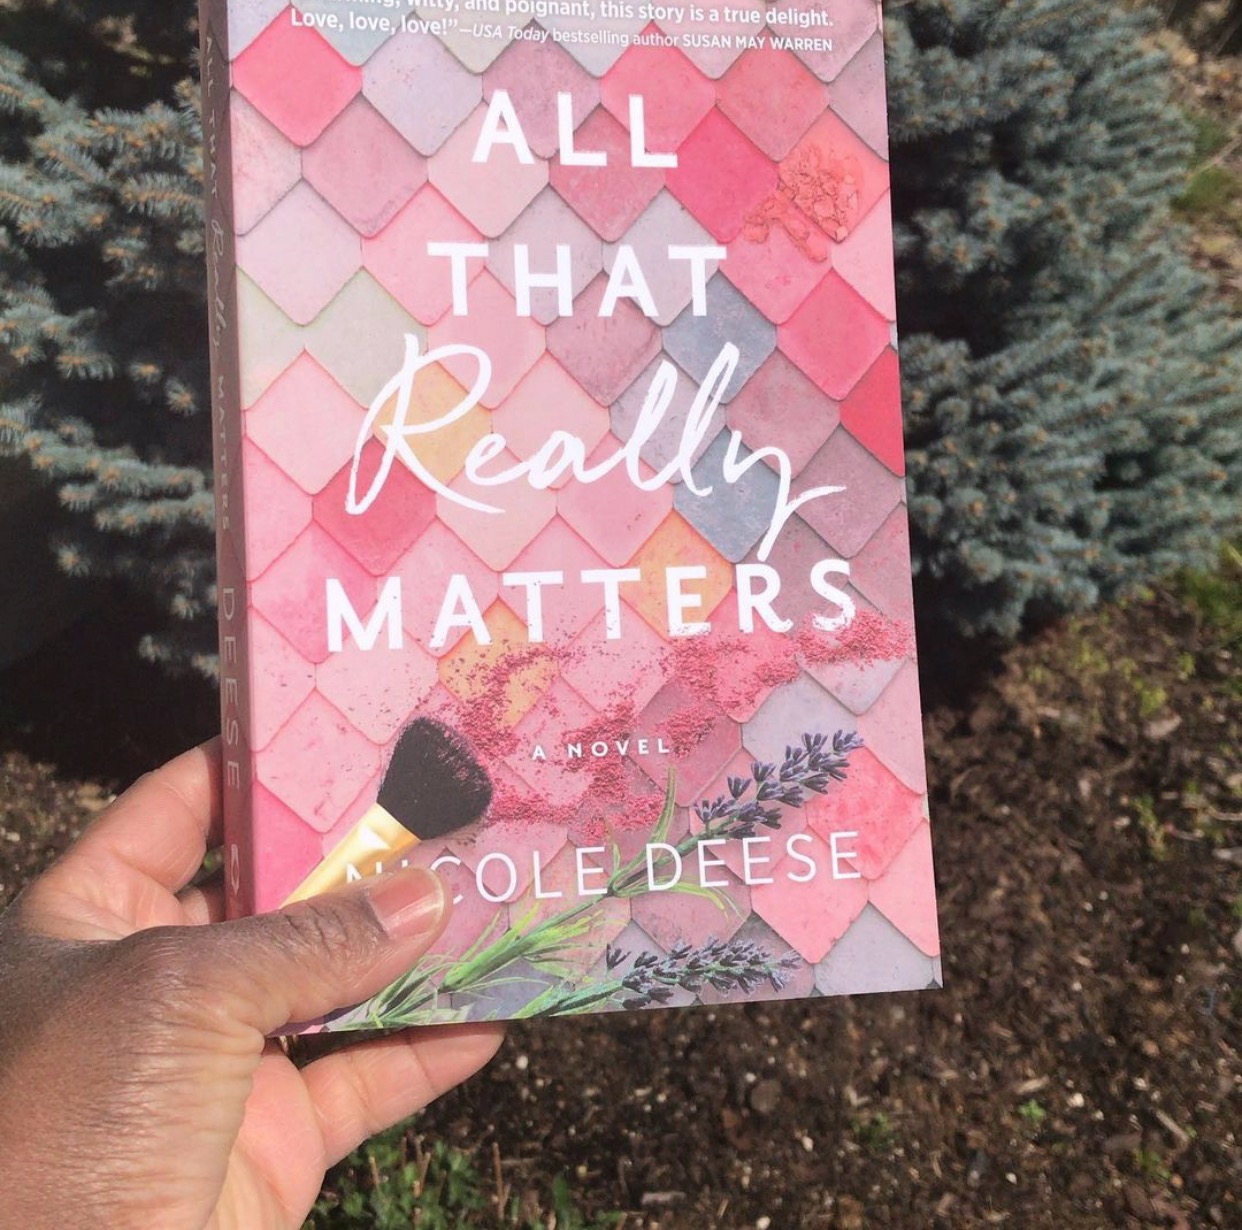 All that Really Matters Nicole Deese Book Review